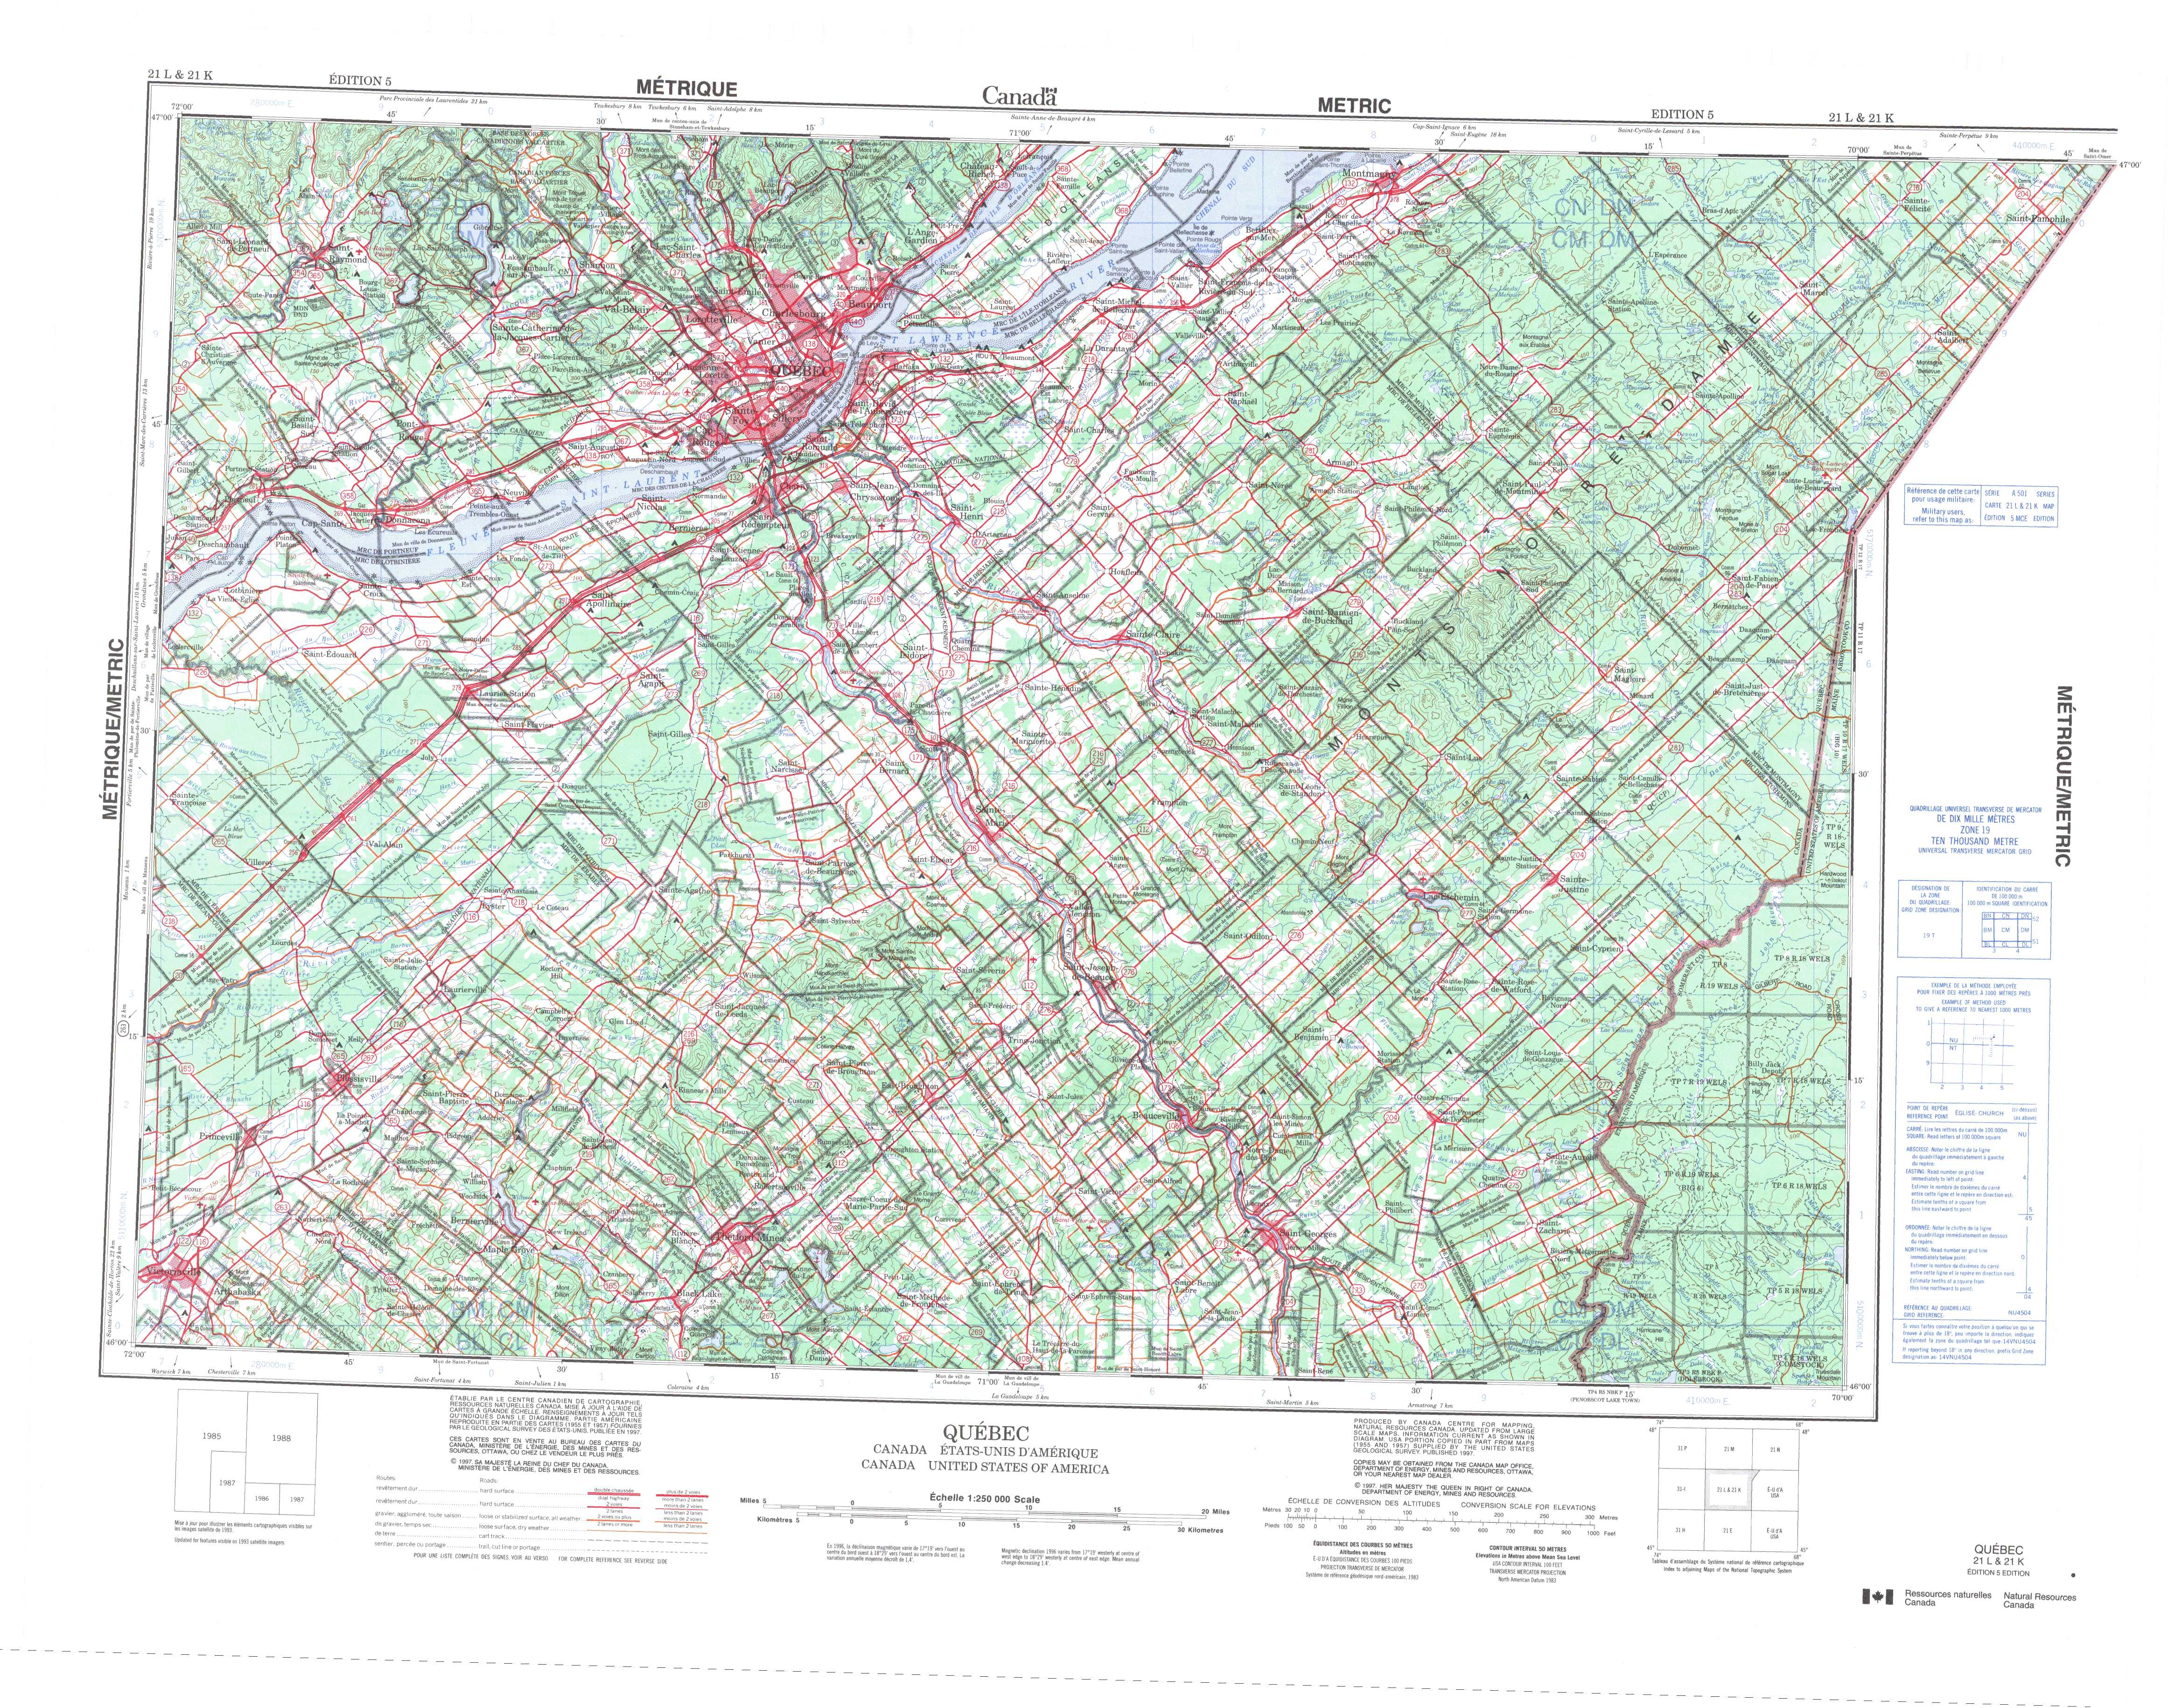 Printable Topographic Map Of Quebec 021L, Qc - Printable Topographic Maps Free